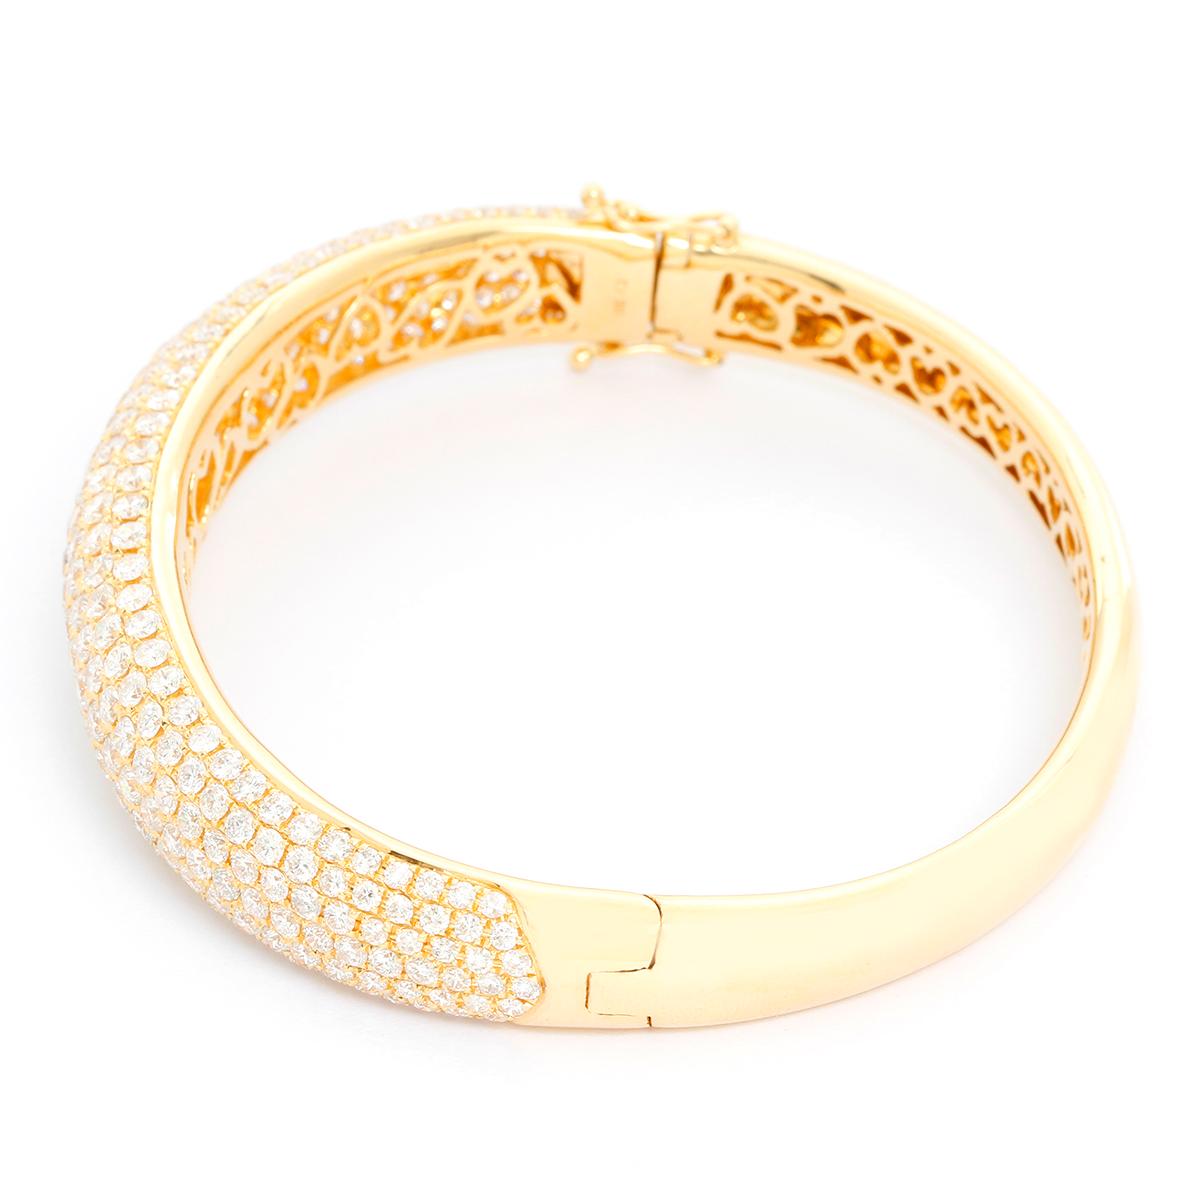 18K Yellow Gold Hinged Diamond Bracelet  - Full cut diamonds weighing 10.6 cts.  set in 18K Yellow gold. Diamond color G-H-I. Diamond Clarity SI. Total weight 35.8 grams. Hallmarks 18K, CJ. Will fit a 6 3/4 inch wrist.